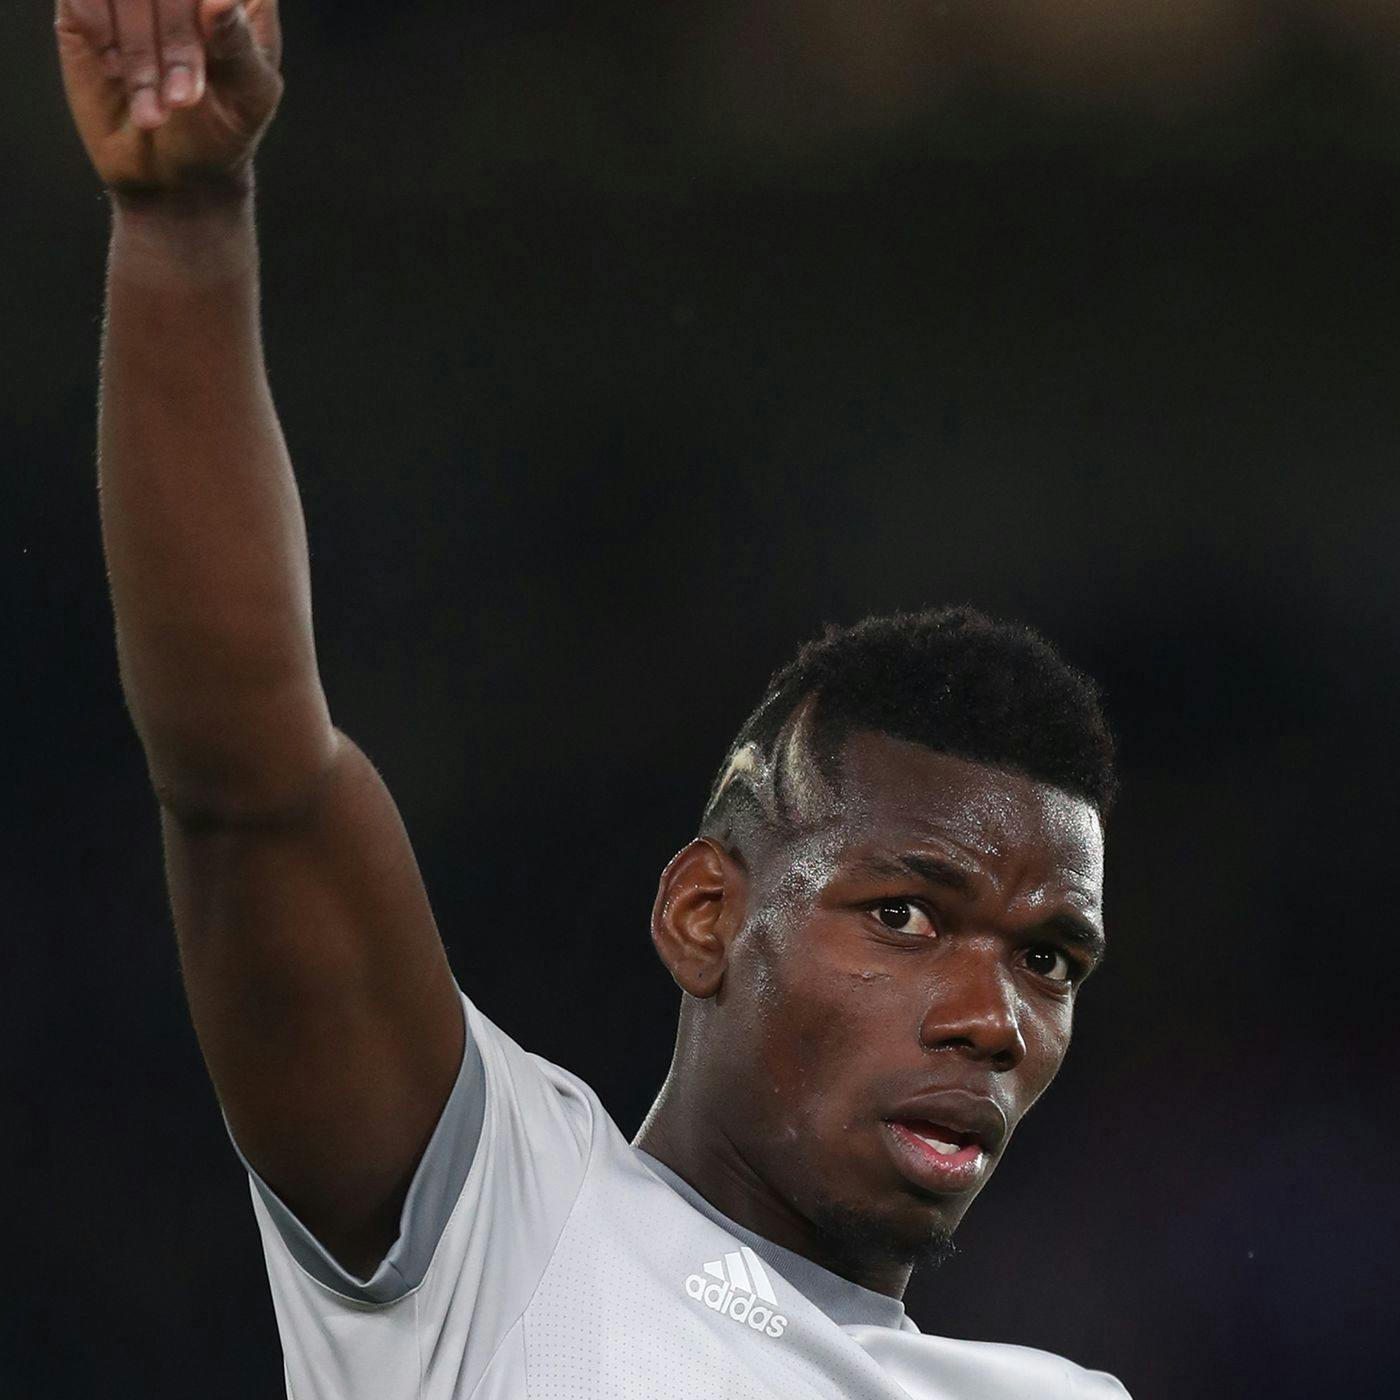 PSG interest in Paul Pogba |Why Liverpool’s dream attacking targets would be Aguero and Eriksen| Rooney and Sam Allardyce to leave Everton?